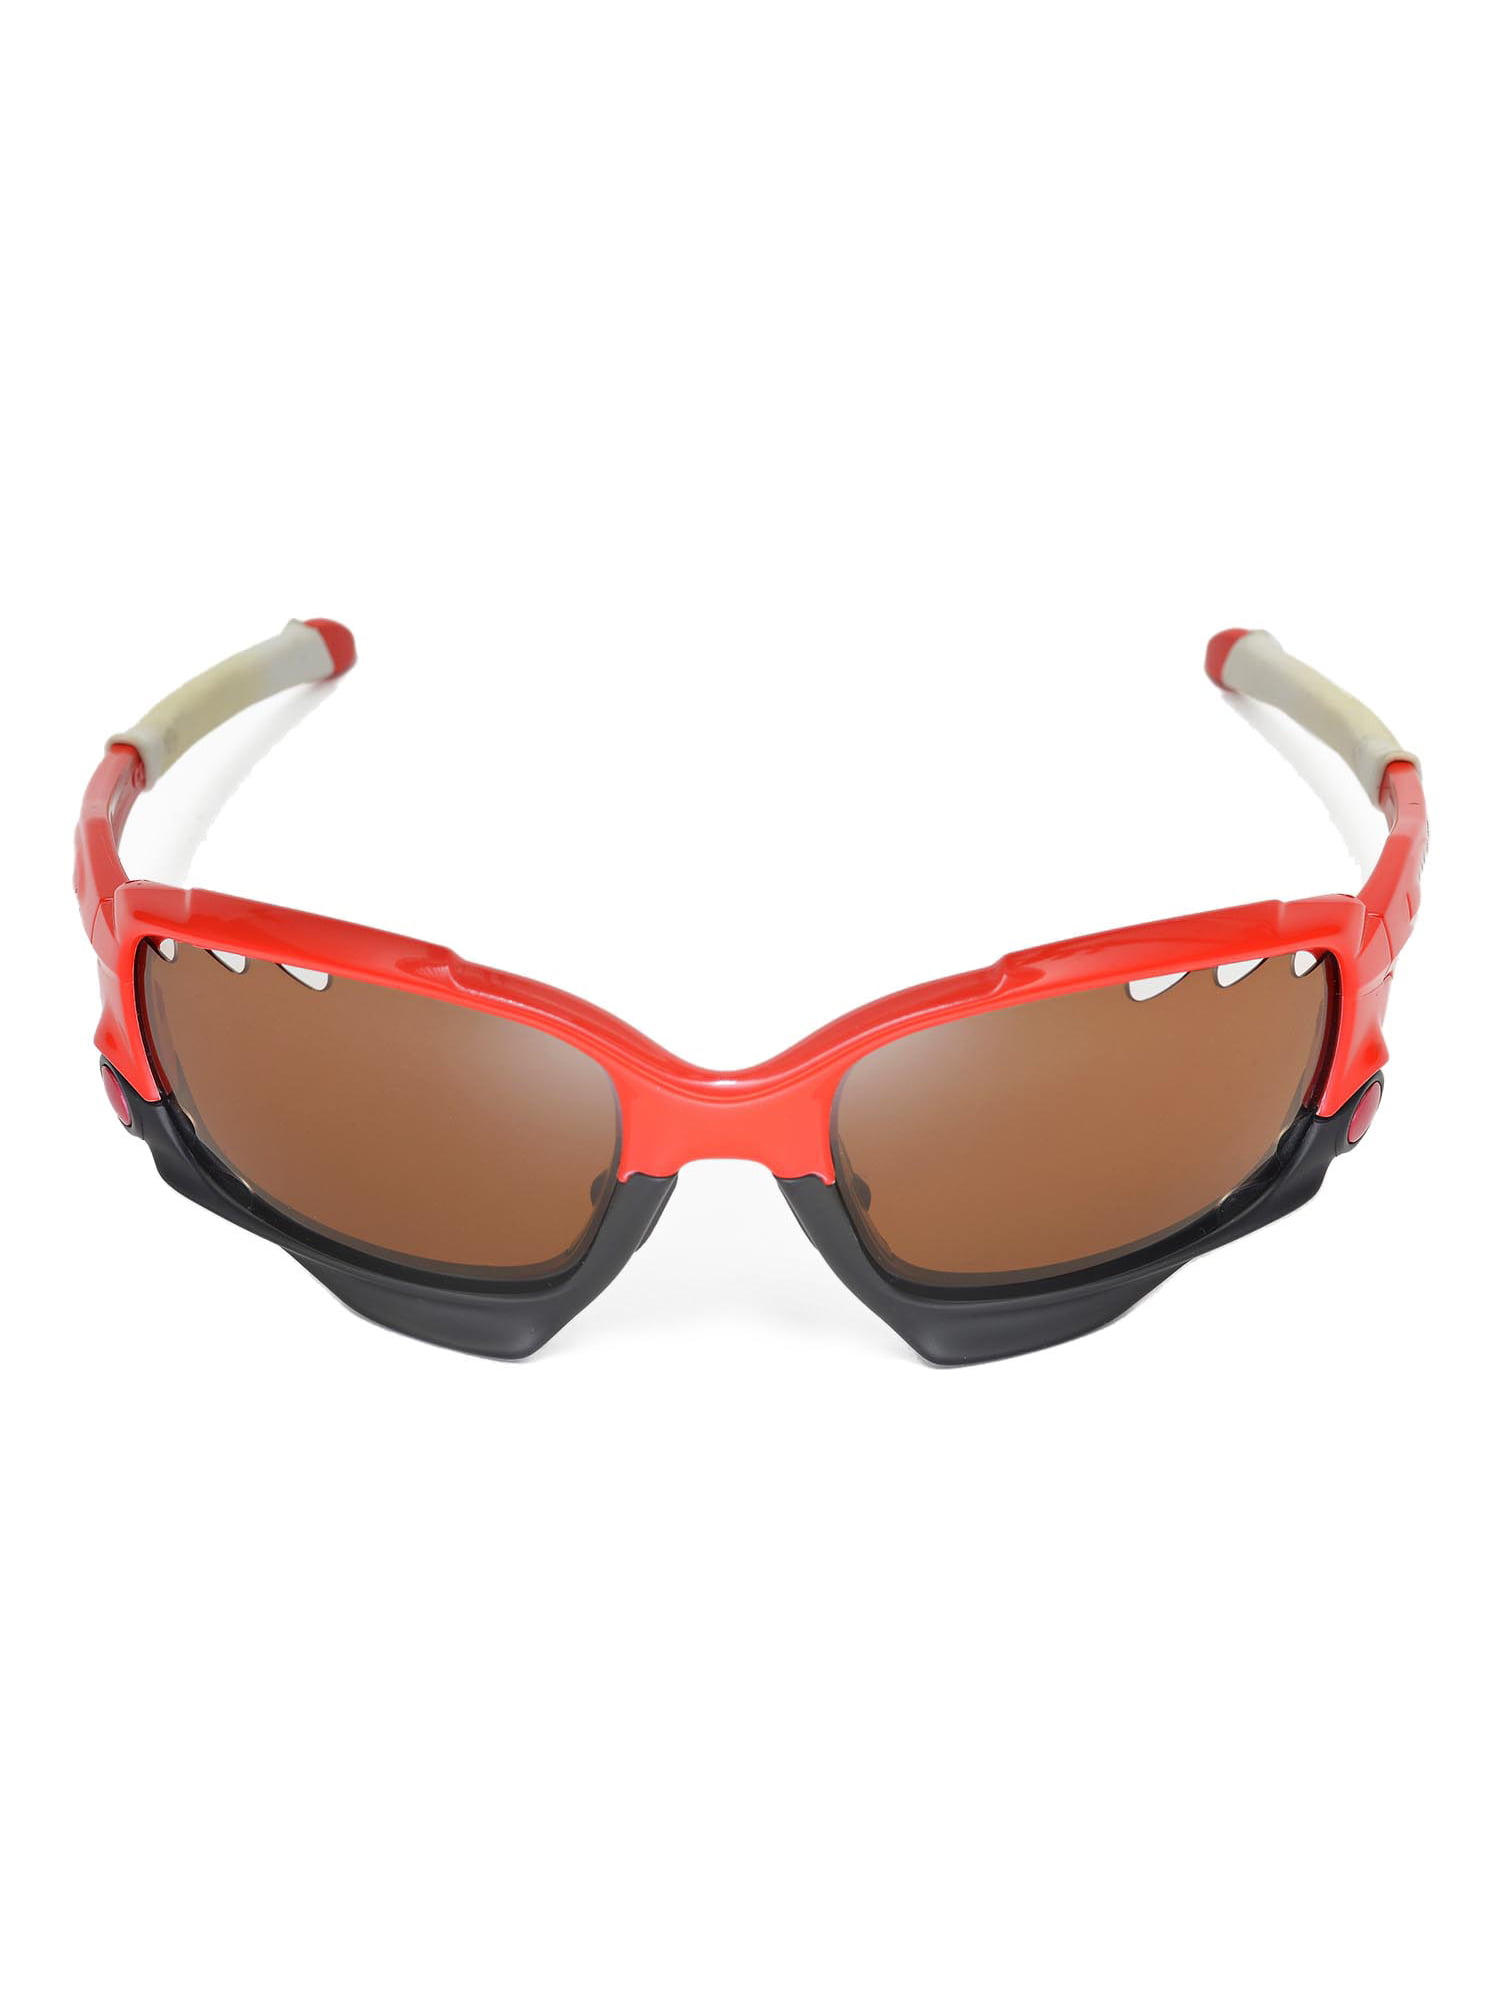 Fire Red Replacement for Racing Jacket Sunglasses - Walmart.com